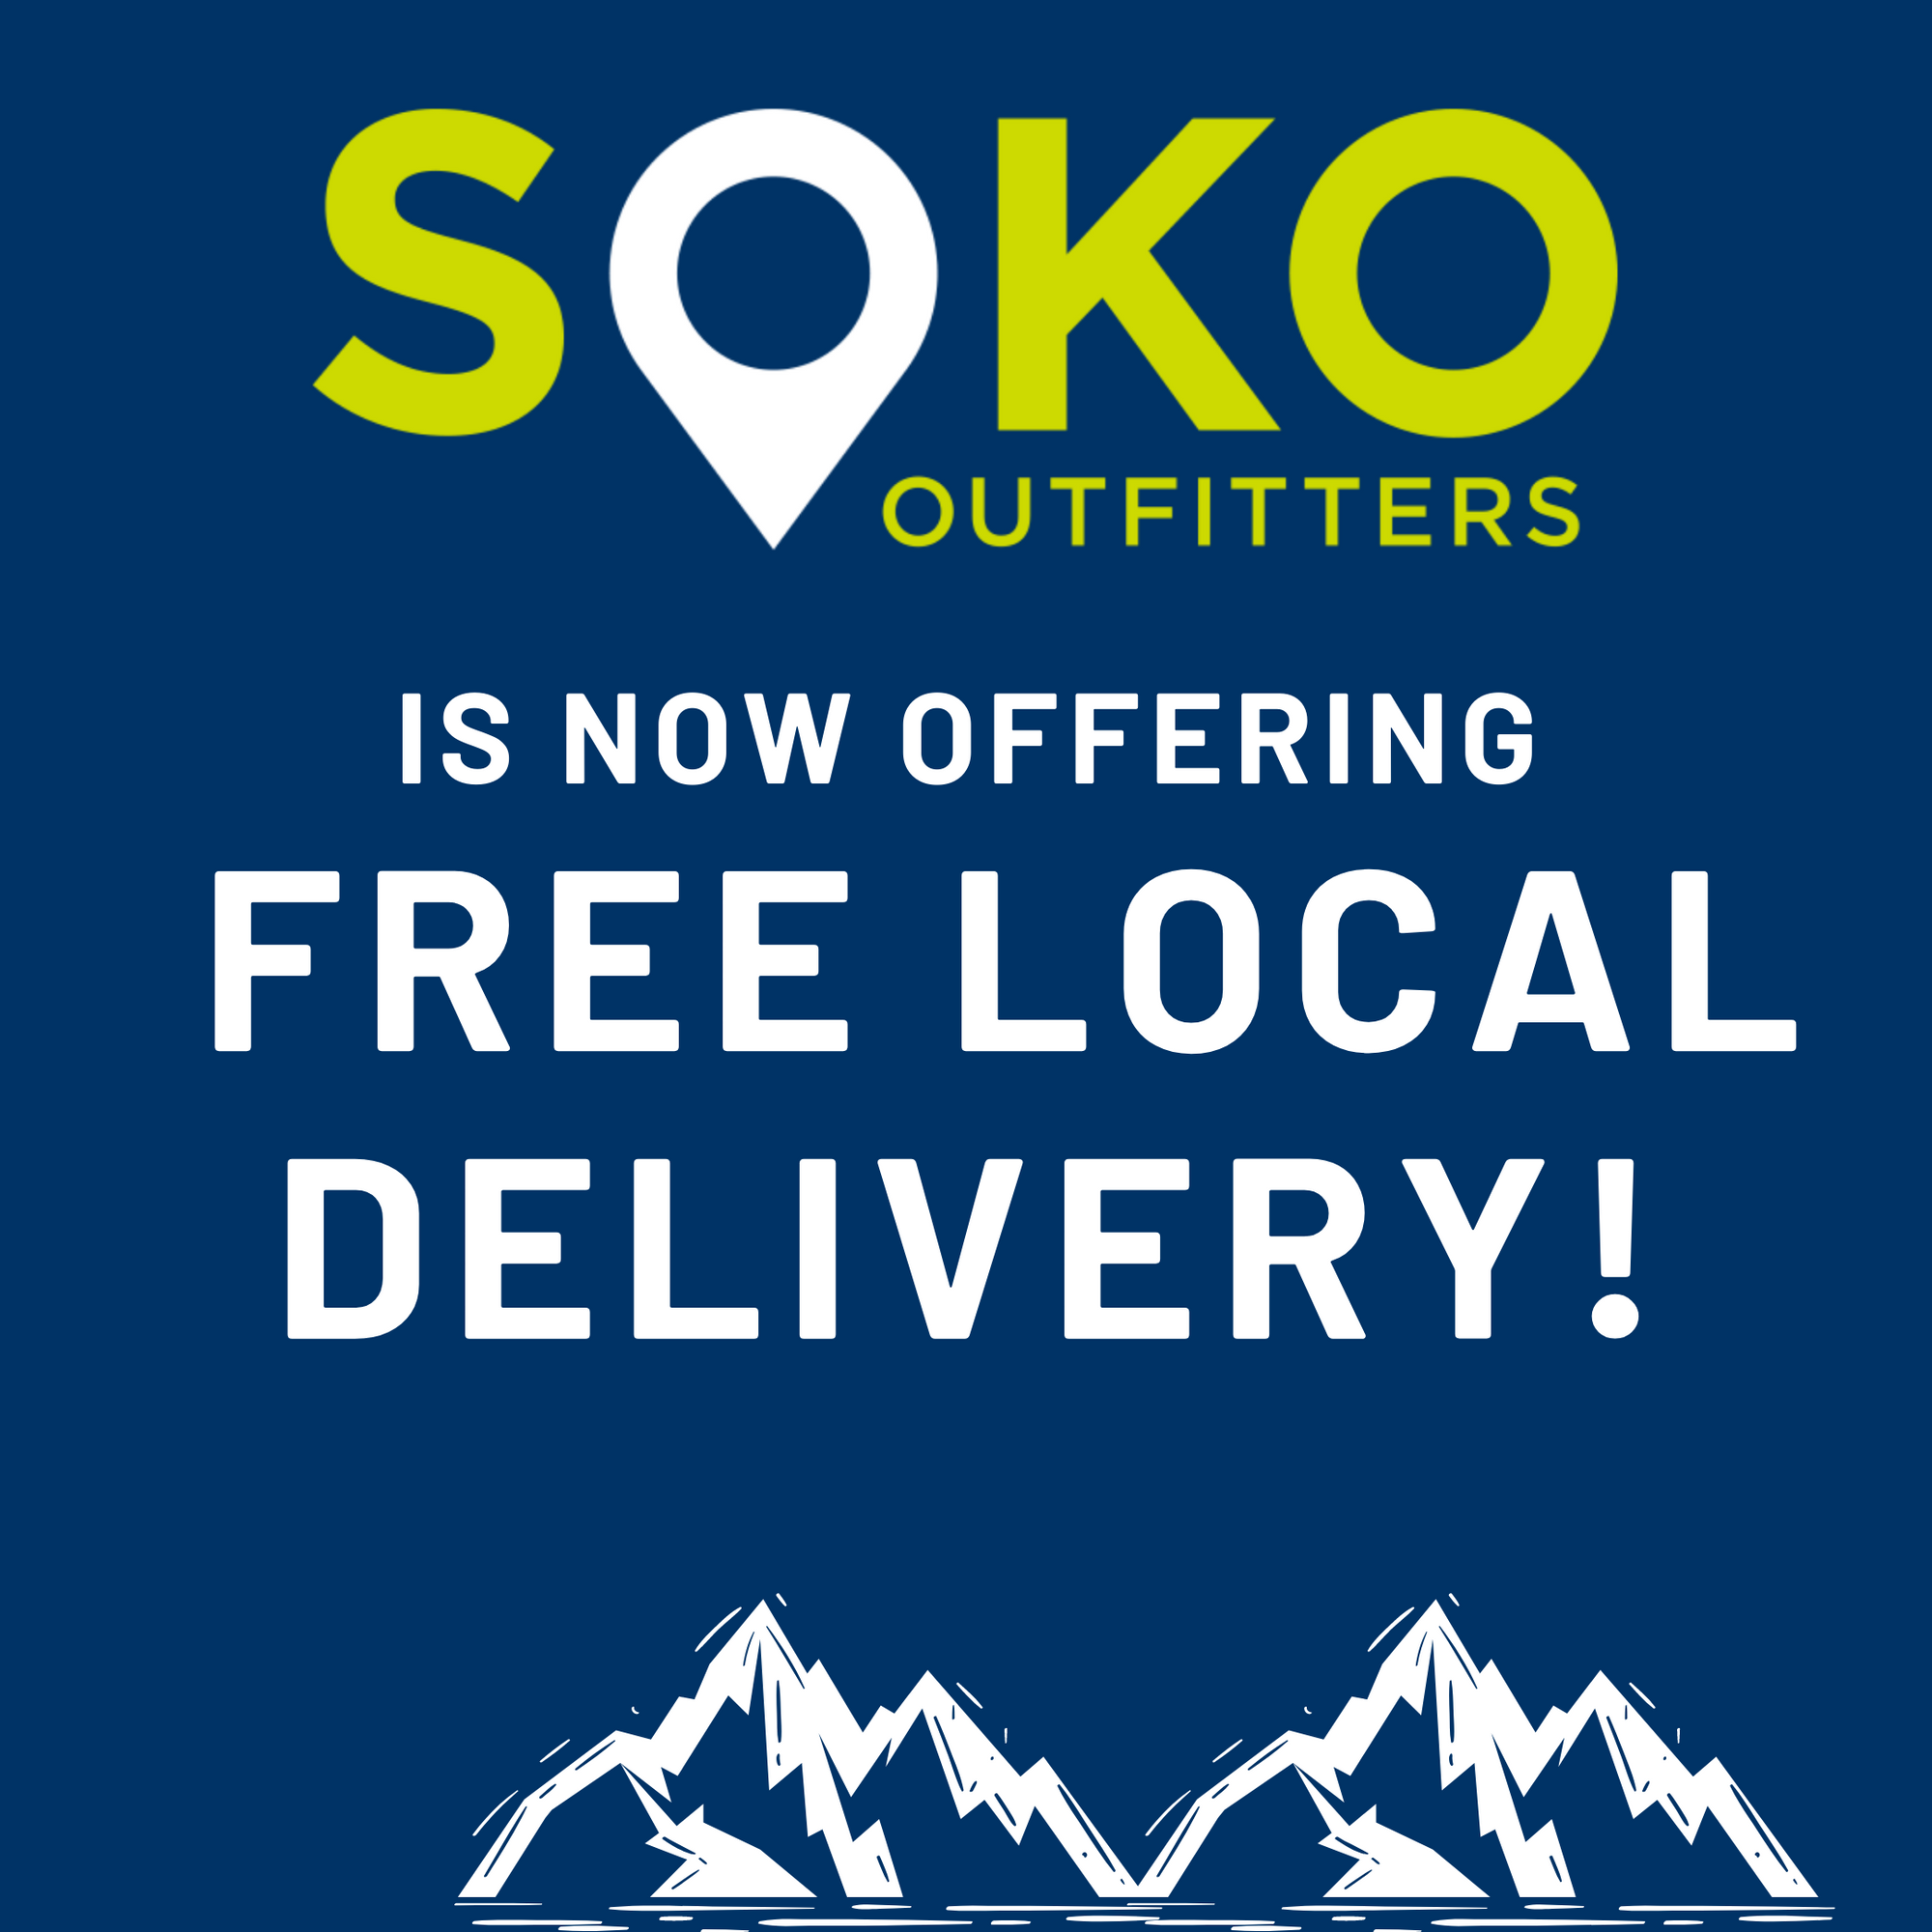 SOKO Offering Free Local Delivery for 2020 Holiday Season